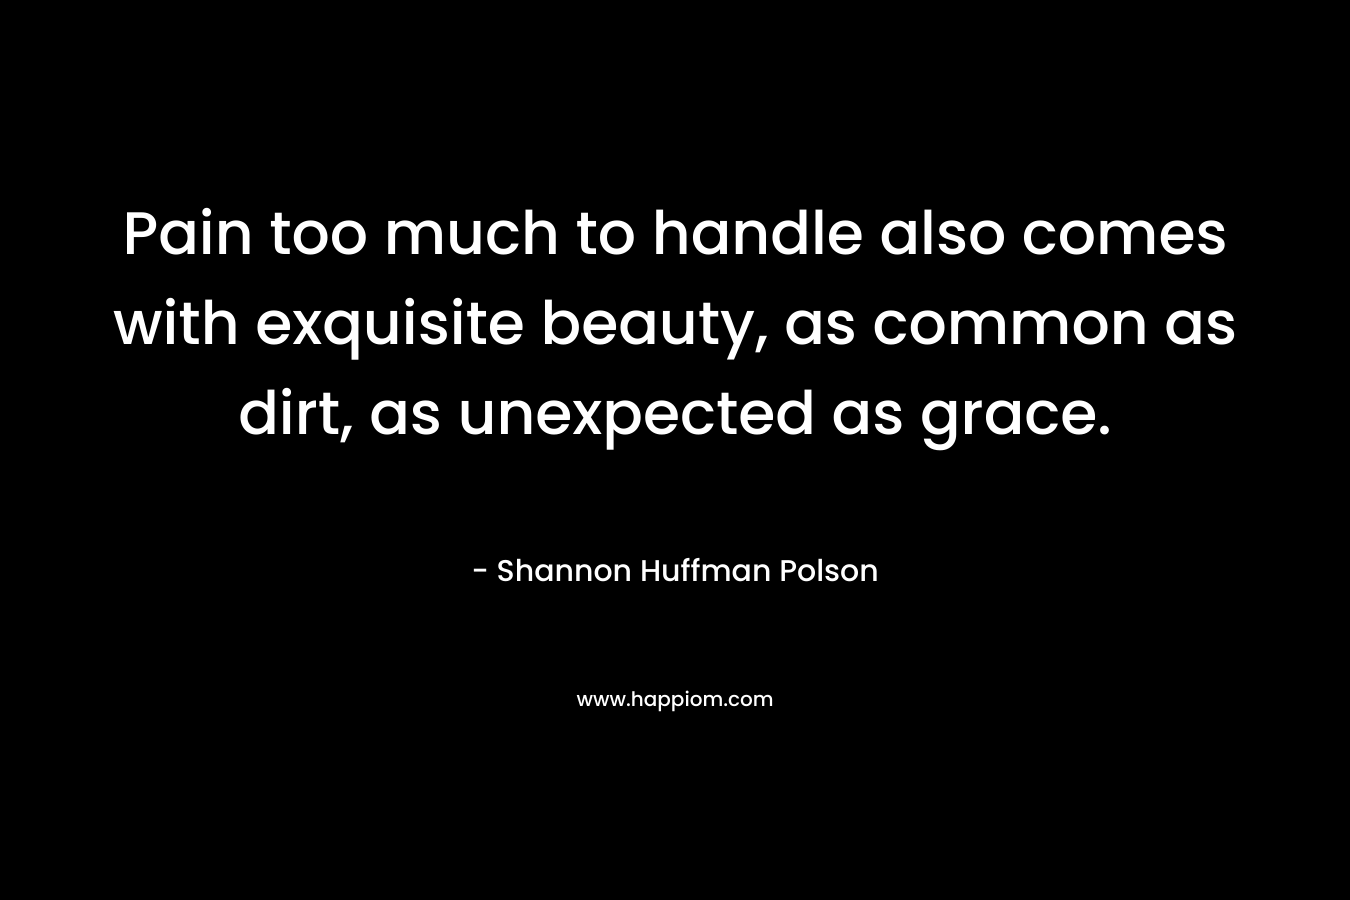 Pain too much to handle also comes with exquisite beauty, as common as dirt, as unexpected as grace.